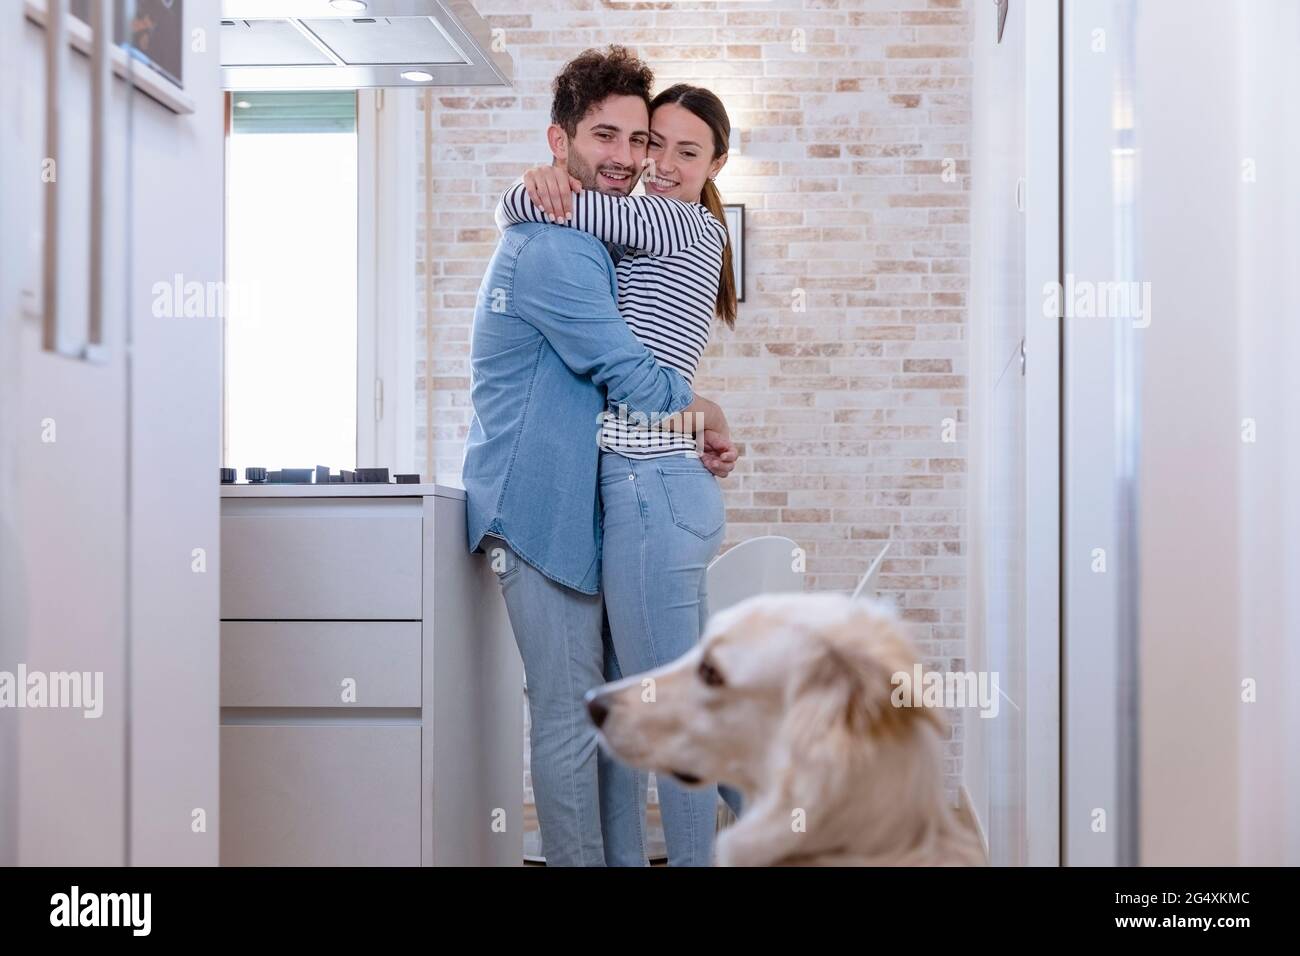 Smiling embracing couple looking at dog in domestic kitchen at home Stock Photo